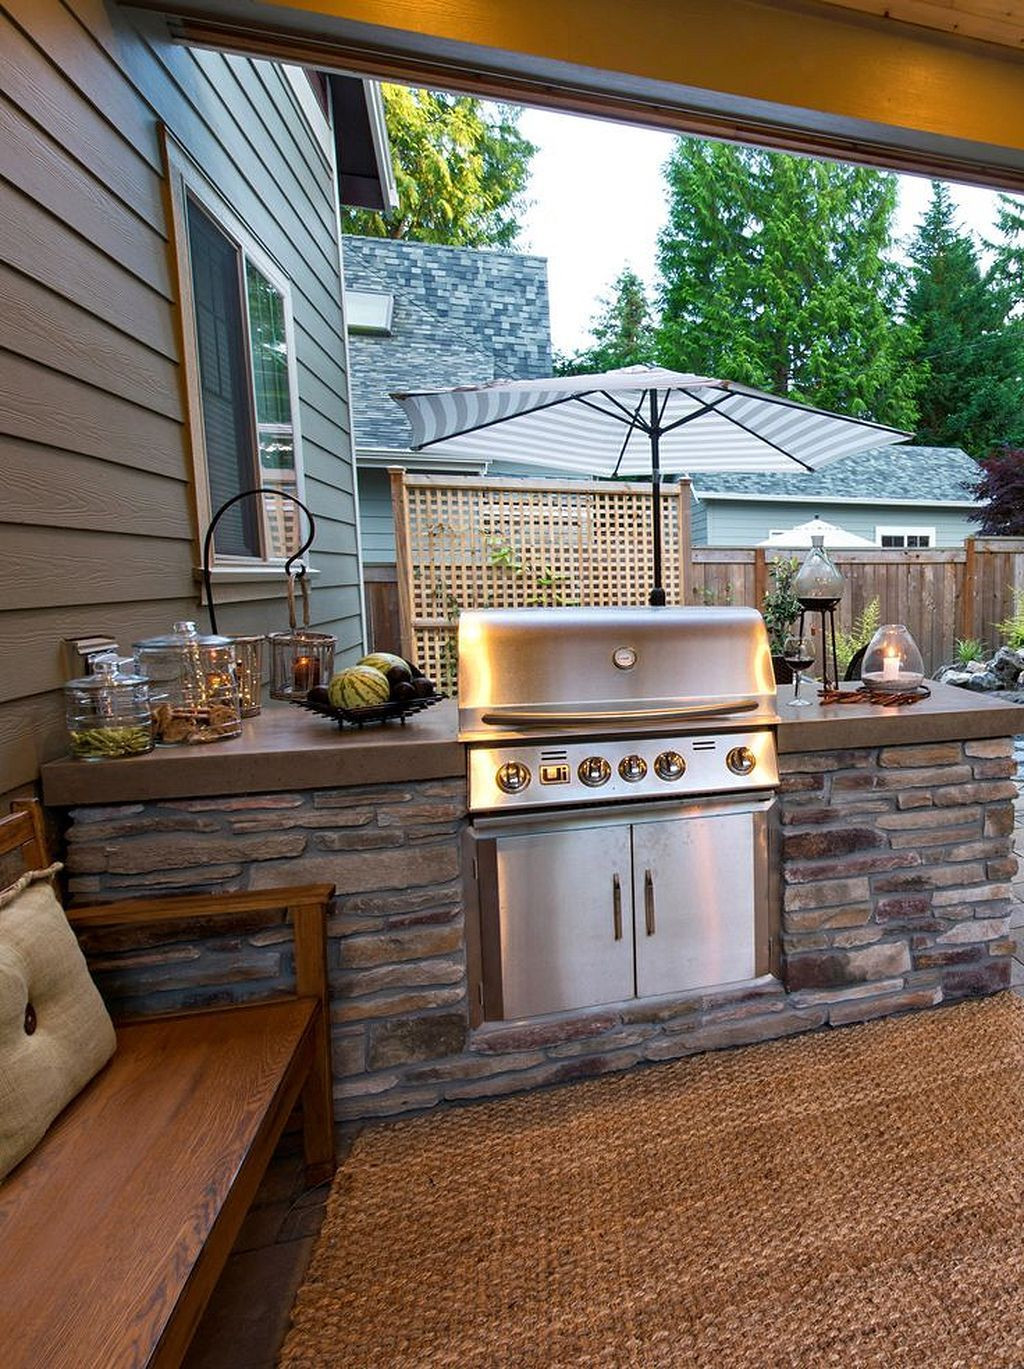 DIY Outdoor Grill Island
 Awesome back patio ideas 7 in 2019